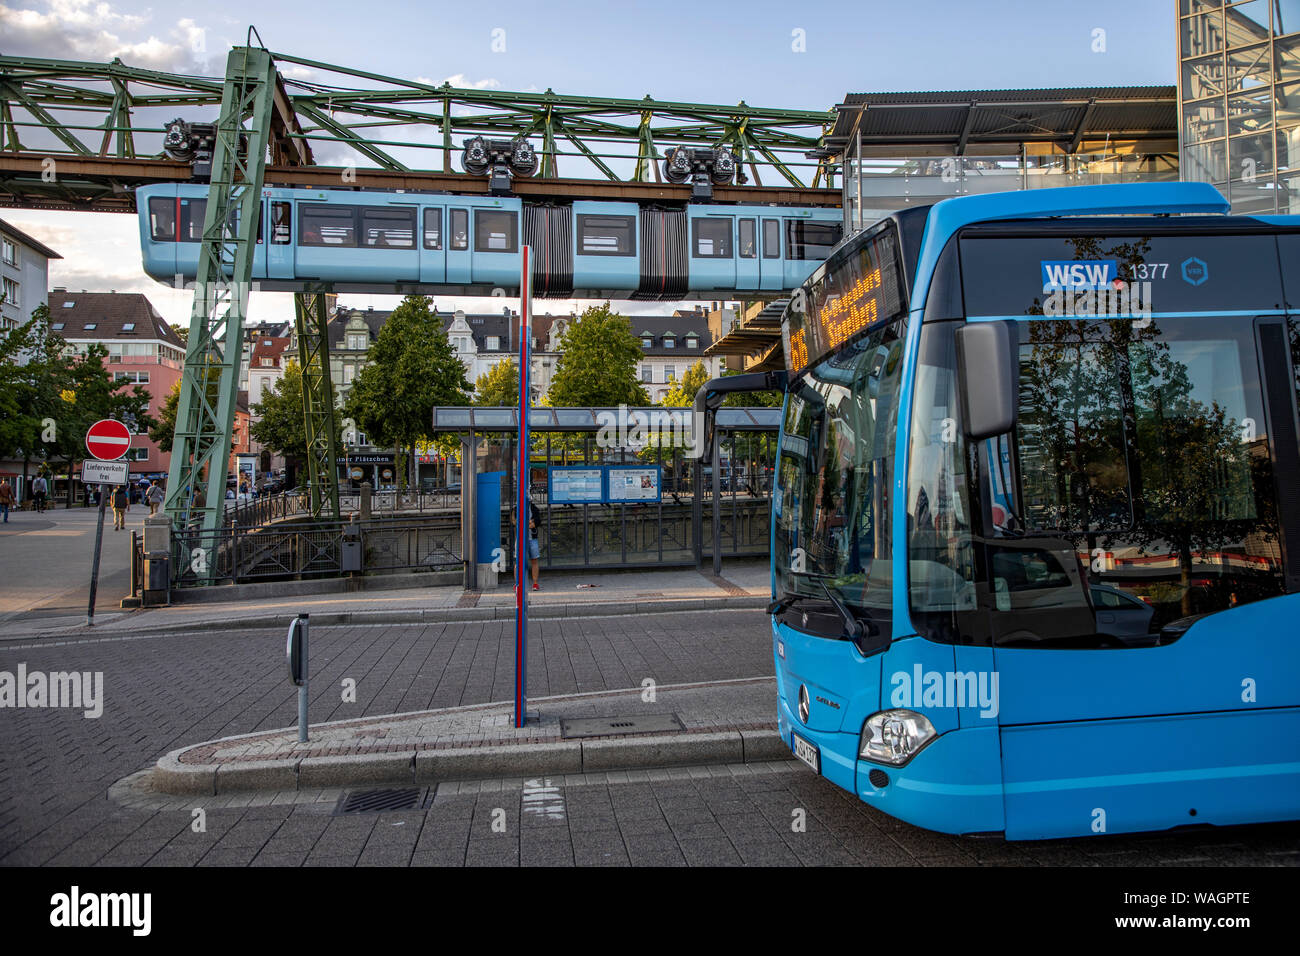 The Wuppertal suspension railway, train of the latest generation 15, Wuppertal, Germany, Wuppertal Barmen Station, Bus connection, Stock Photo